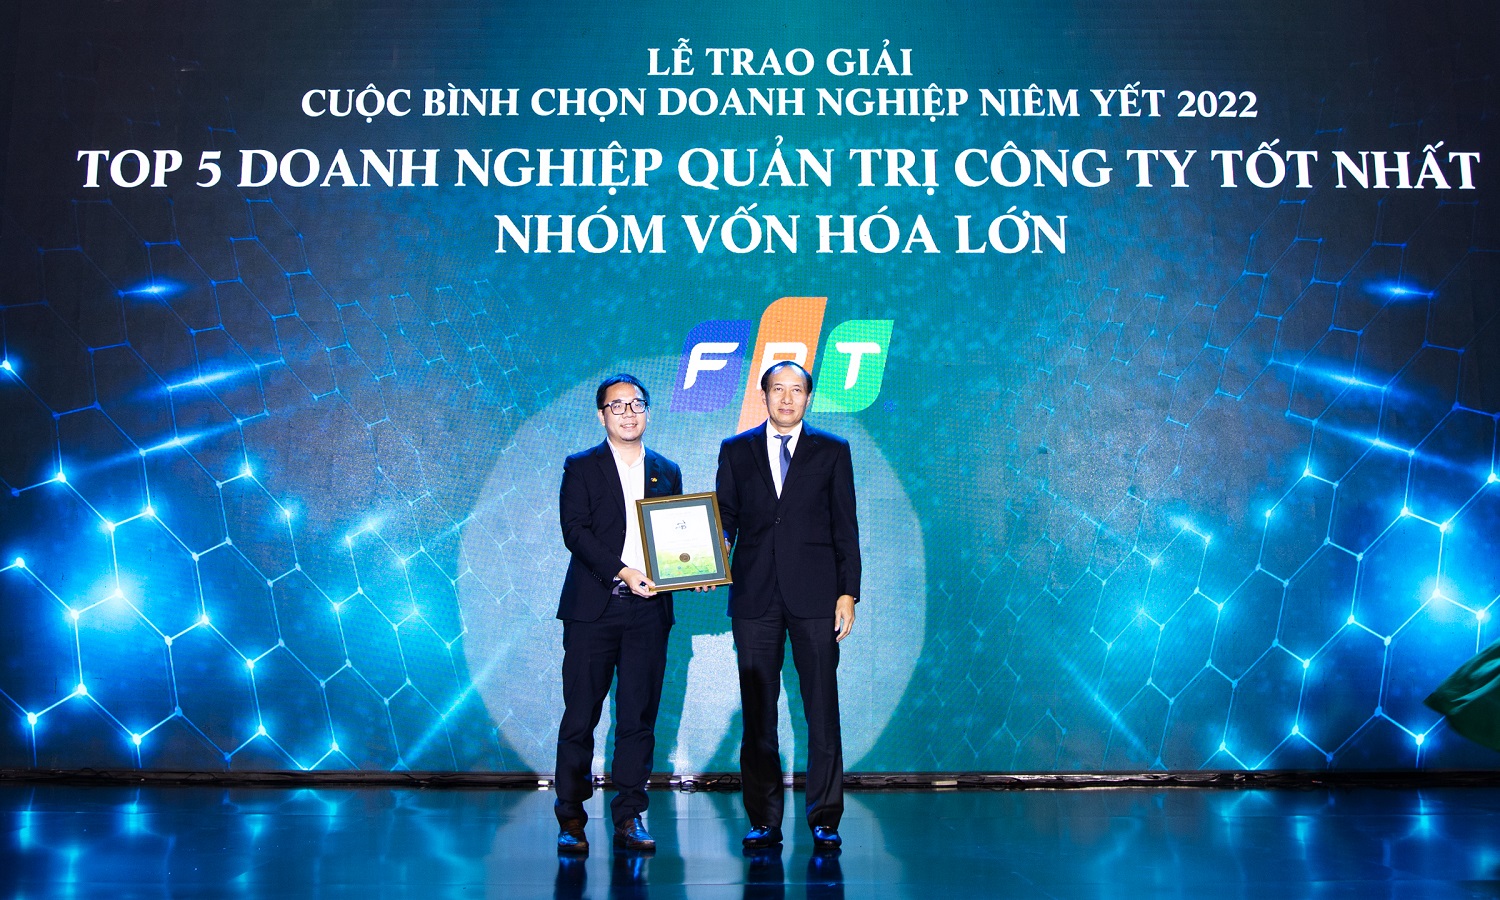 Representative of FPT, Mr. Vo Dang Phat, Chief of Marketing and Communications (CMO), received the Award of Top 5 Large-cap Enterprises with Best Corporate Governance